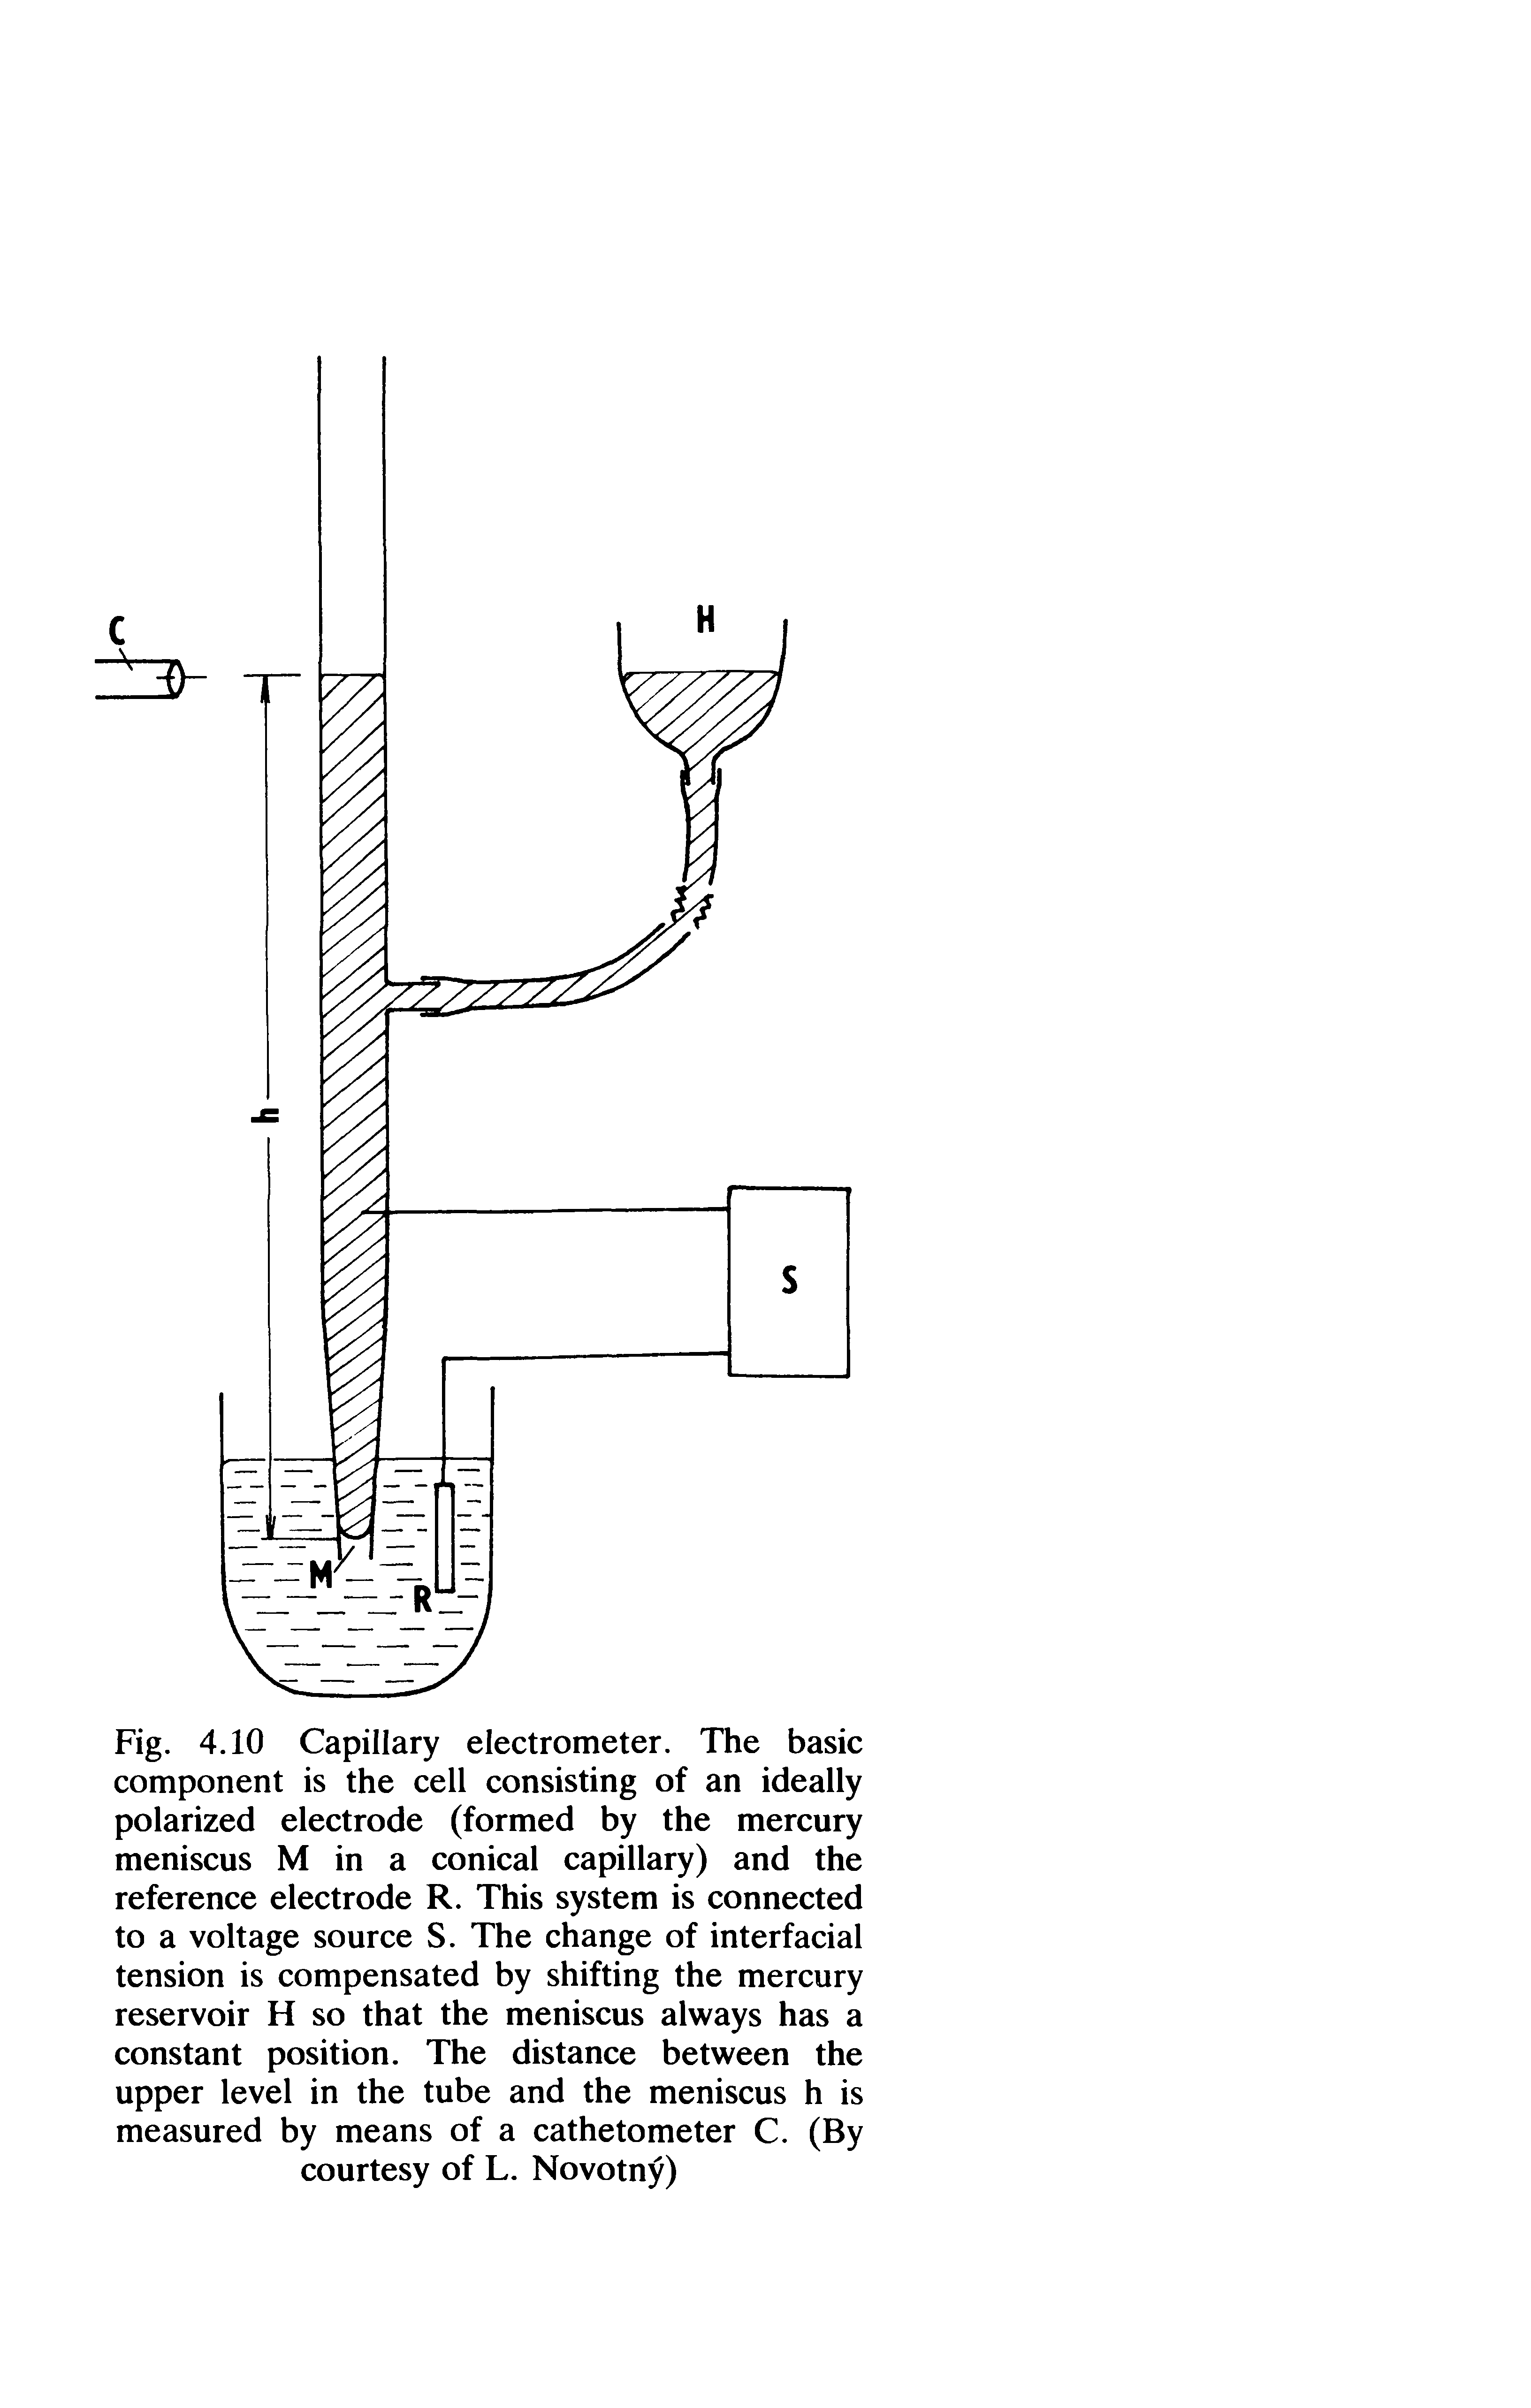 Fig. 4.10 Capillary electrometer. The basic component is the cell consisting of an ideally polarized electrode (formed by the mercury meniscus M in a conical capillary) and the reference electrode R. This system is connected to a voltage source S. The change of interfacial tension is compensated by shifting the mercury reservoir H so that the meniscus always has a constant position. The distance between the upper level in the tube and the meniscus h is measured by means of a cathetometer C. (By courtesy of L. Novotny)...